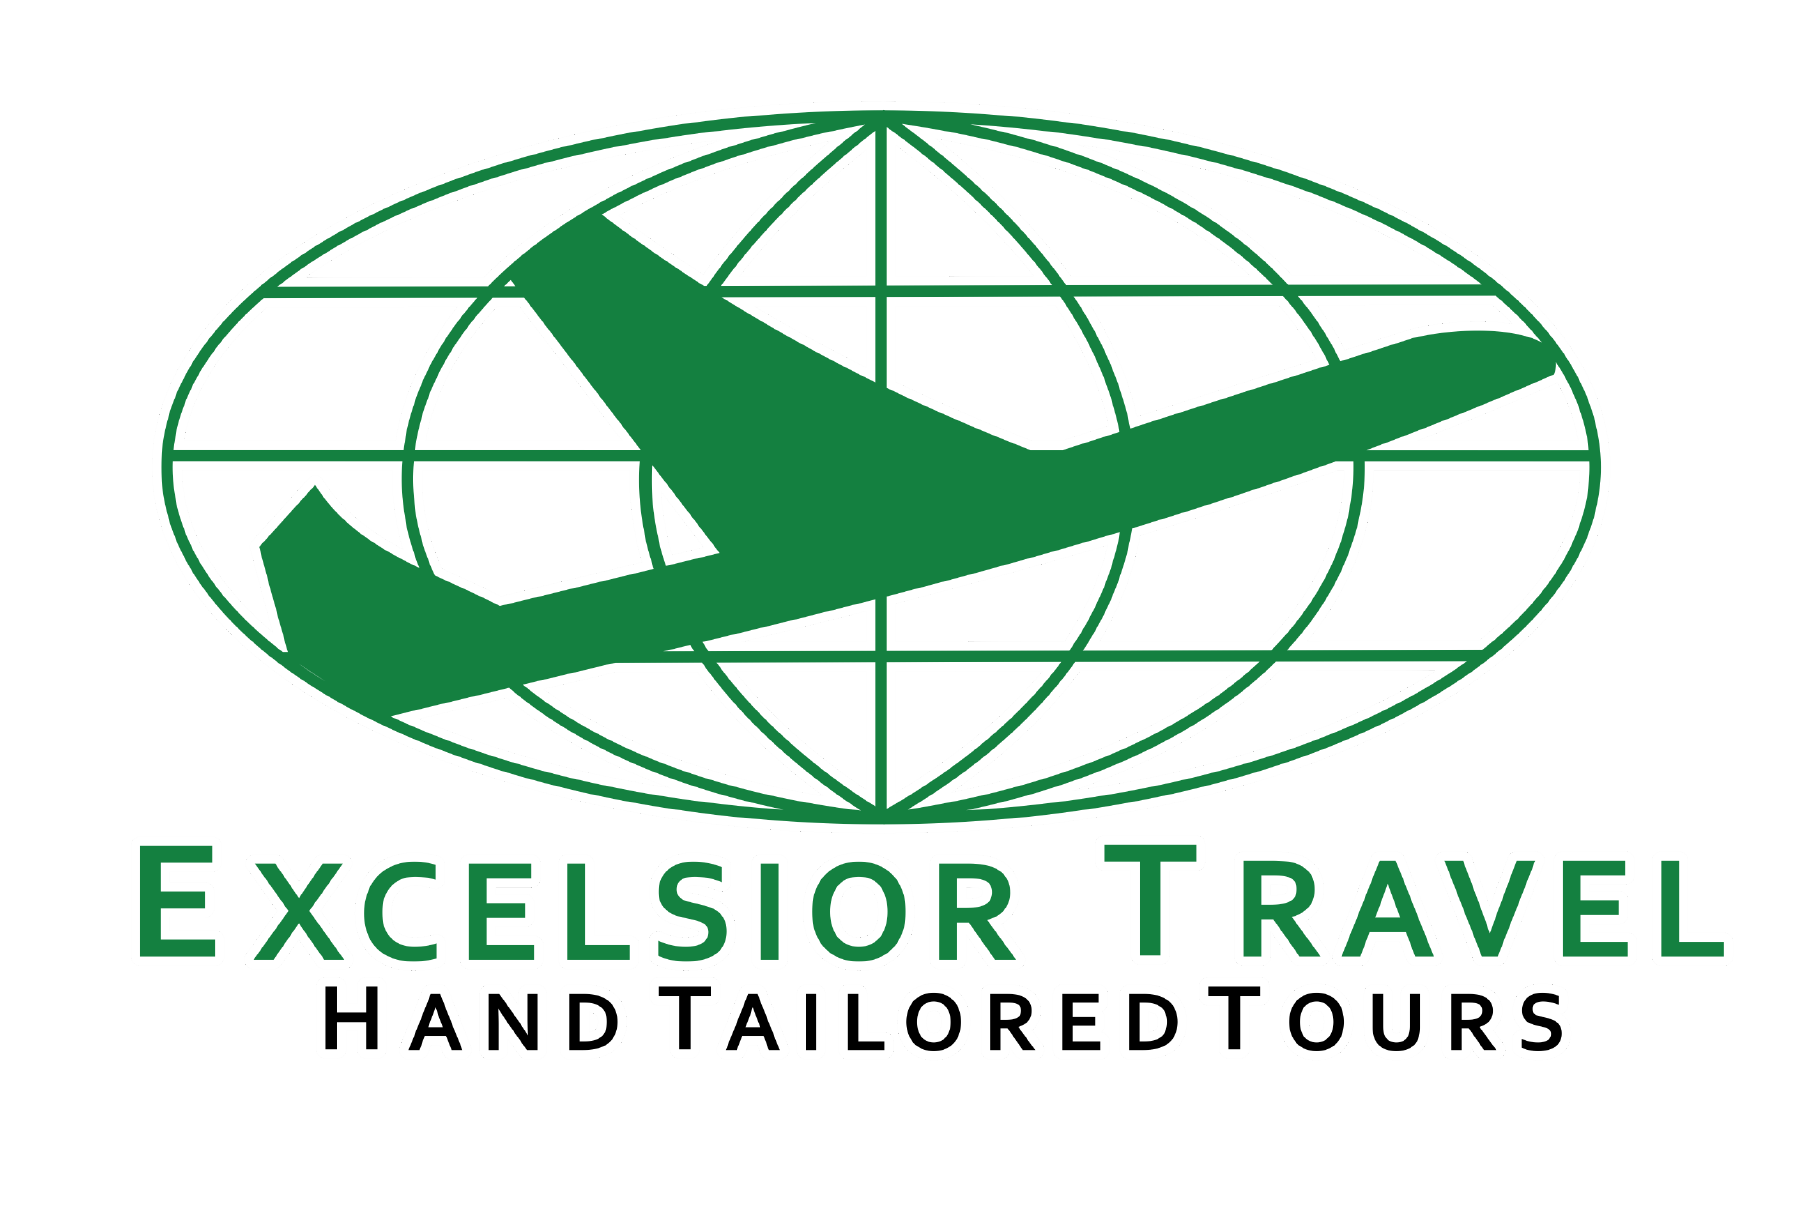 The Best Travel Agency in Houston with Payment plan available